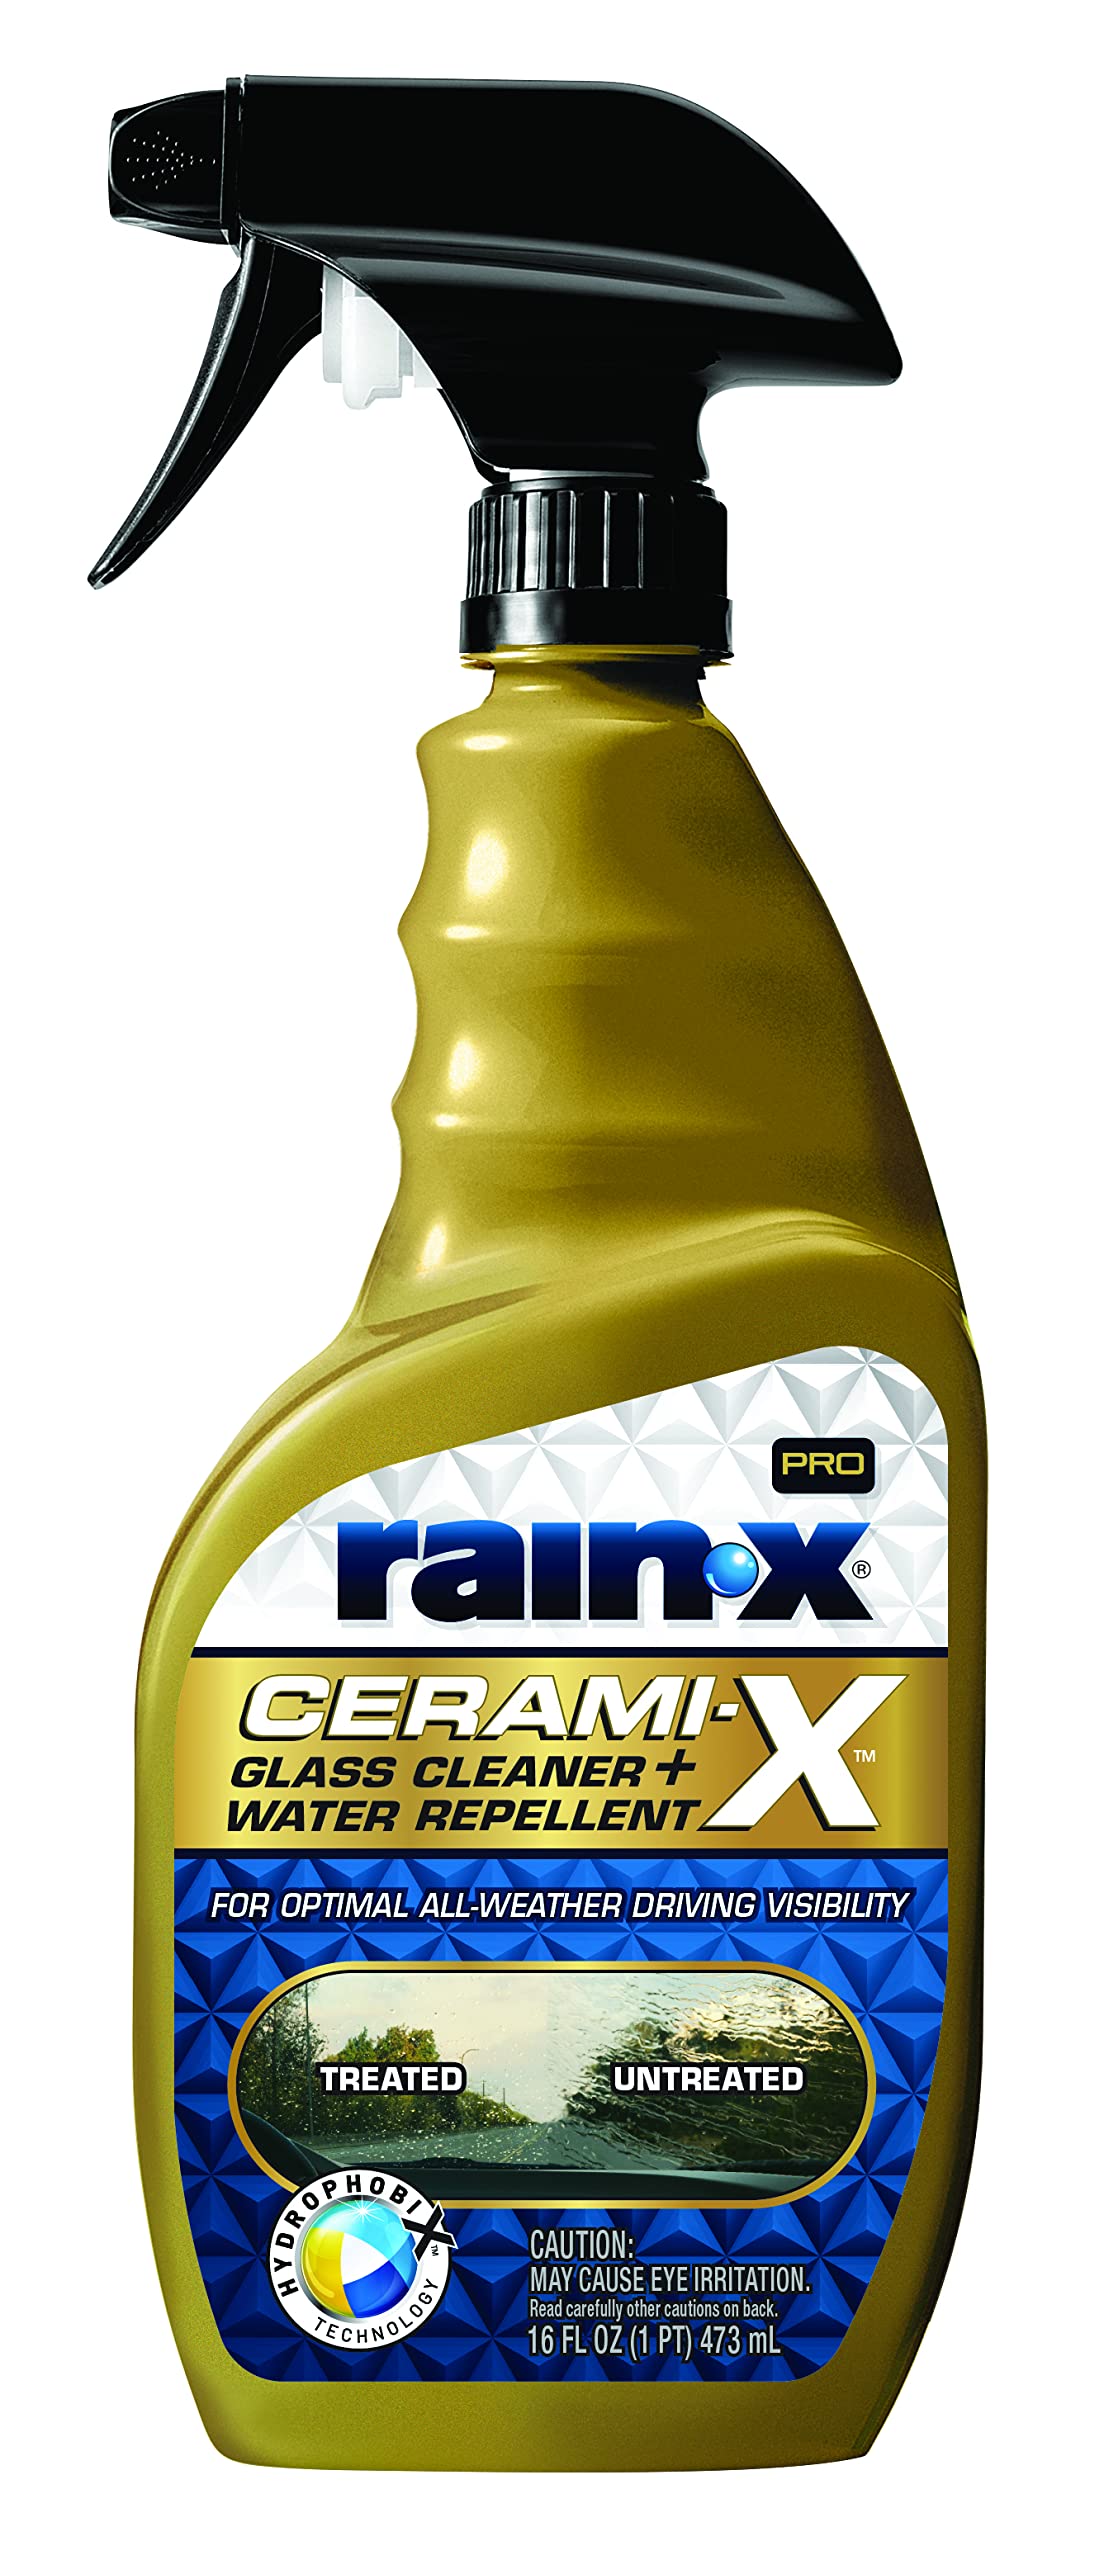 Rain-X 630178 Cerami-X Glass Cleaner + Water Repellent, 16oz - Cleaning  Effectively While Remaining Streak